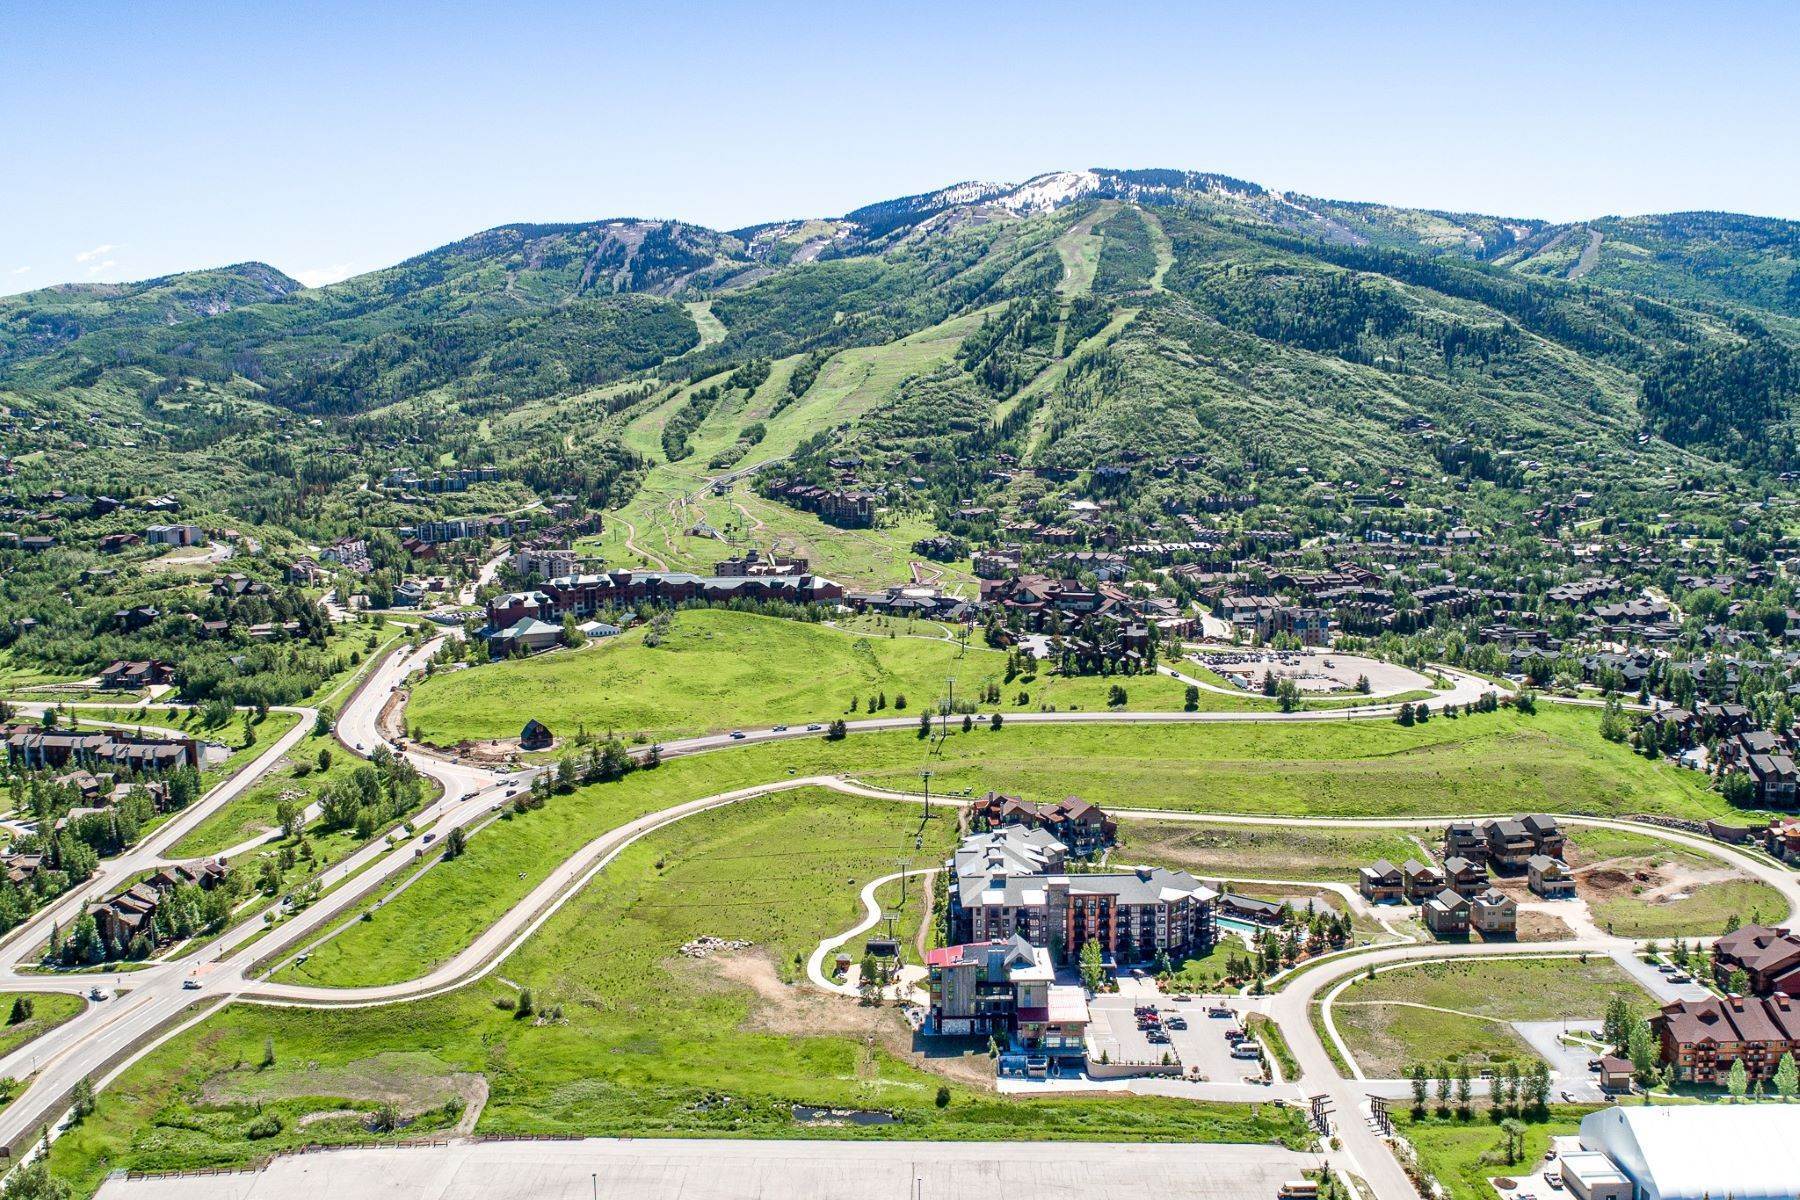 Property for Sale at Prime Development Opportunity at the base of Wildhorse Gondola 1200 Mt Werner Road Steamboat Springs, Colorado 80487 United States